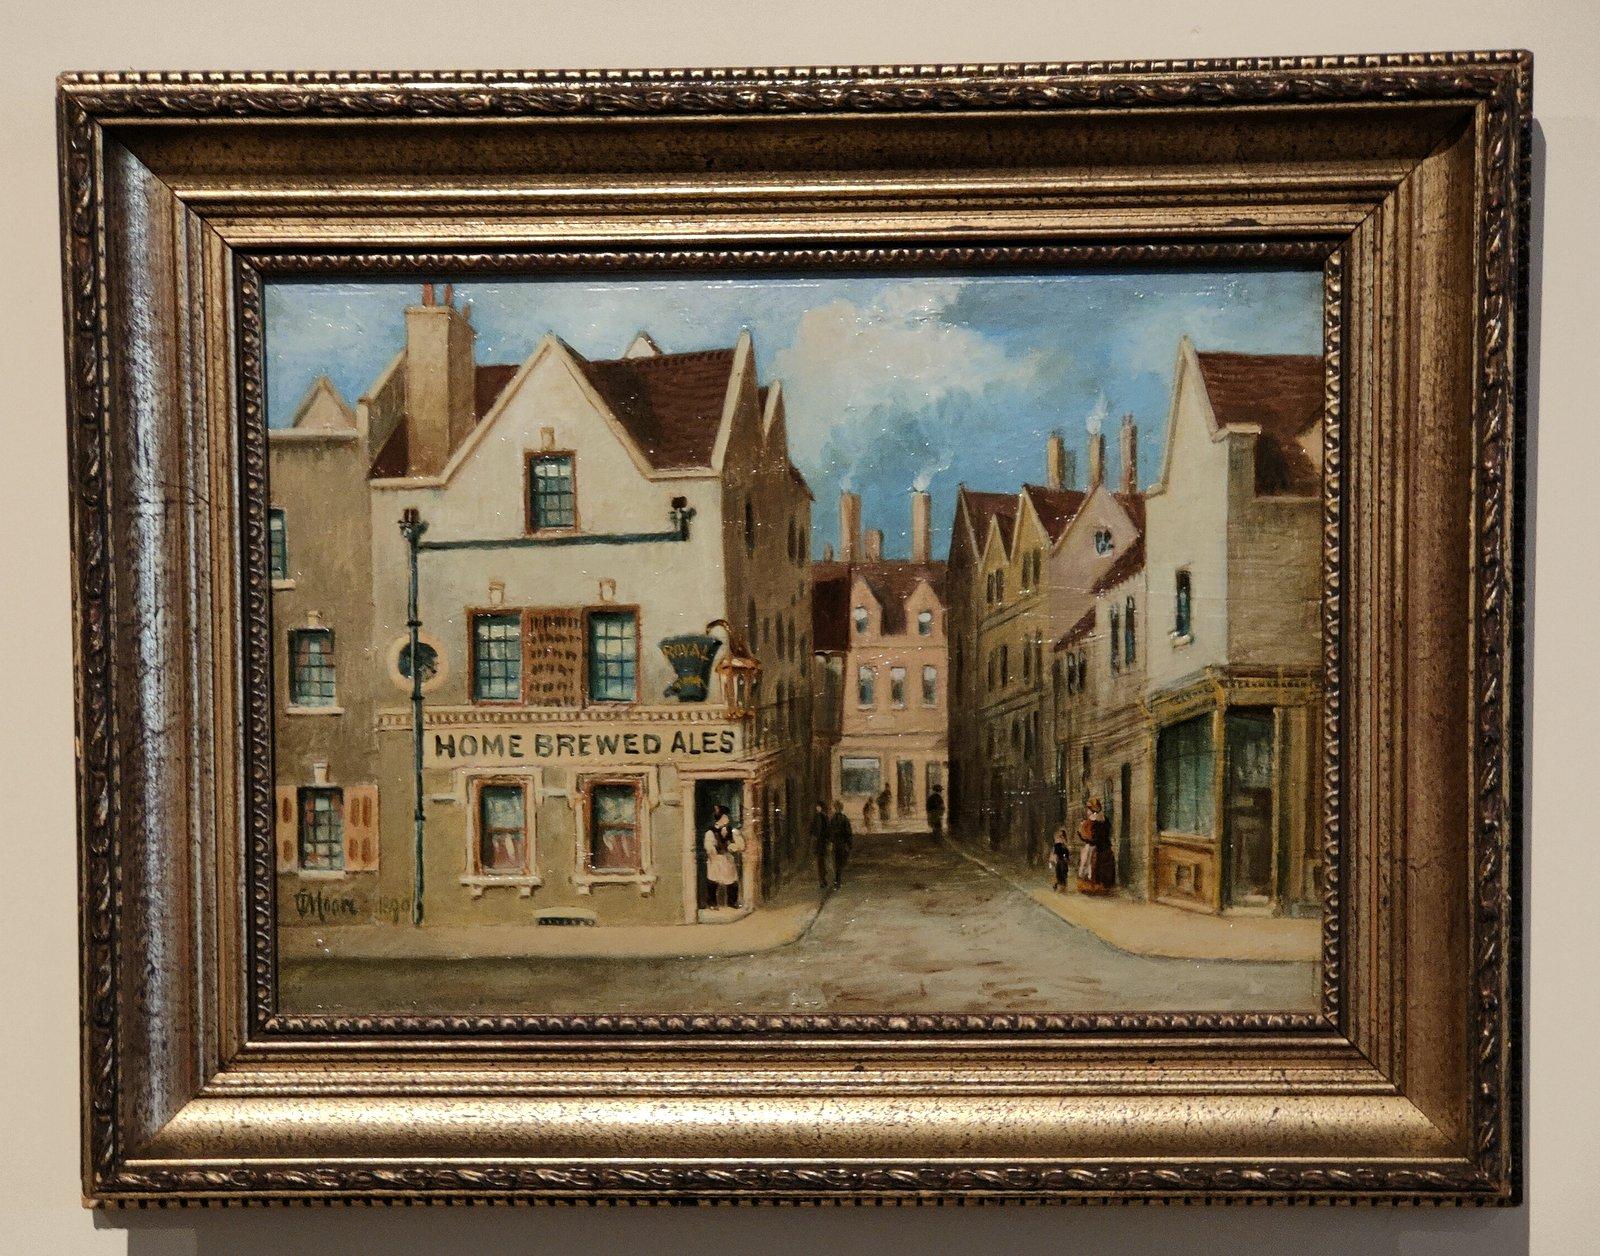 Oil Painting by Thomas Cooper Moore "The Royal Children, Castle Gate, Nottingham" 1827 -1901 Nottingham painter of coastal maritime scenes and townscapes, regular exhibitor at the Nottingham society of Artists. Oil on panel. Signed and dated